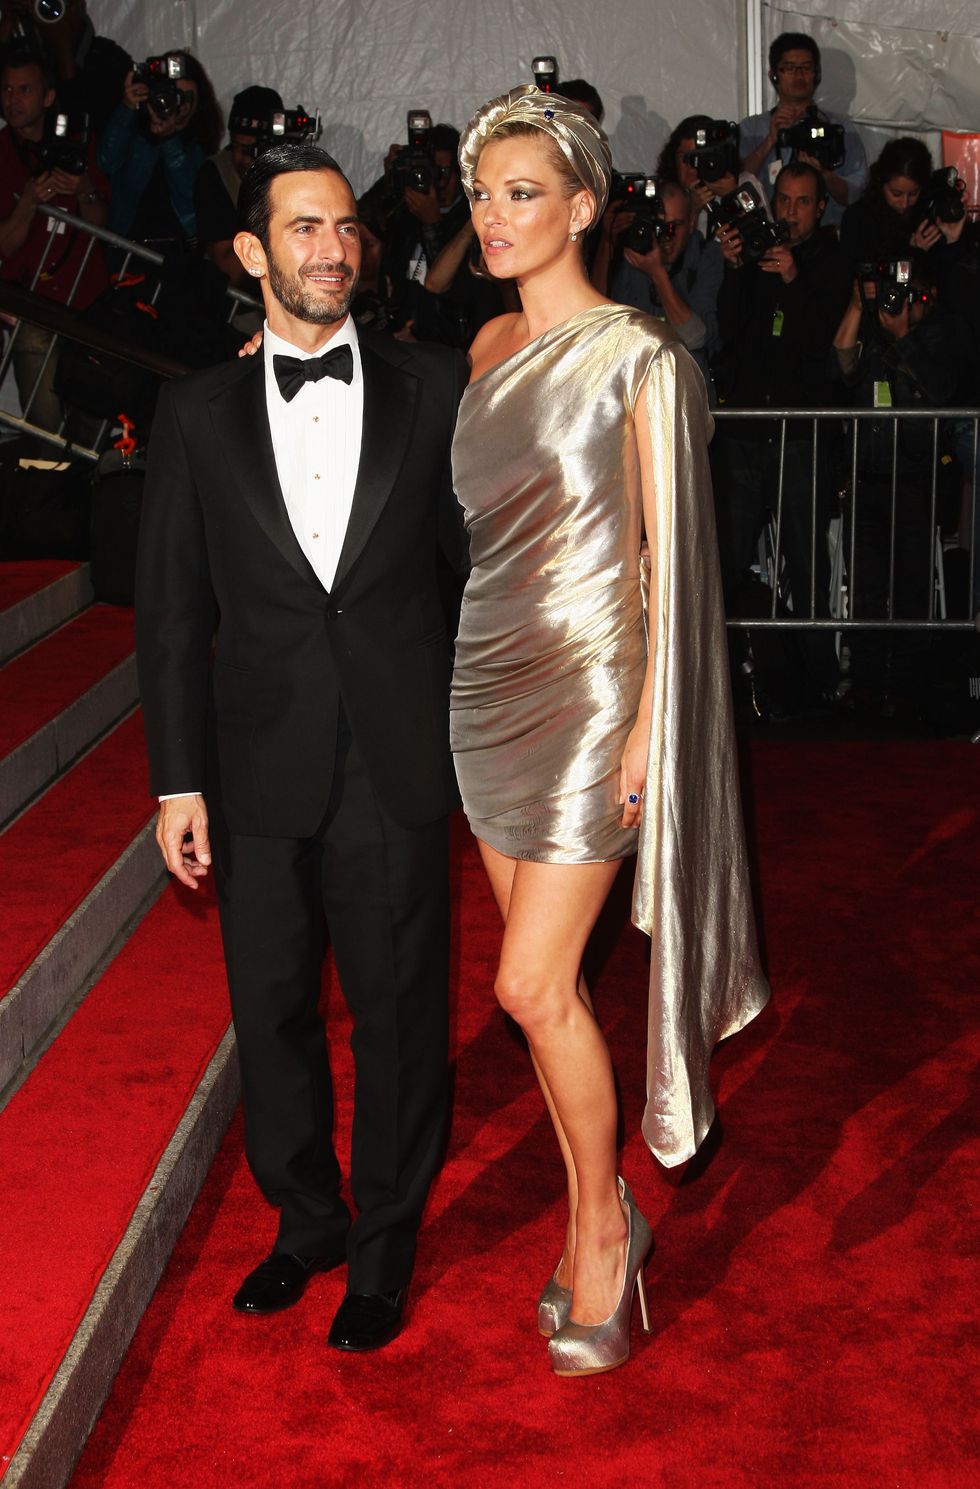 new york may 04 marc jacobs and kate moss attend the model as muse embodying fashion costume institute gala at the metropolitan museum of art on may 4, 2009 in new york city photo by stephen lovekingetty images